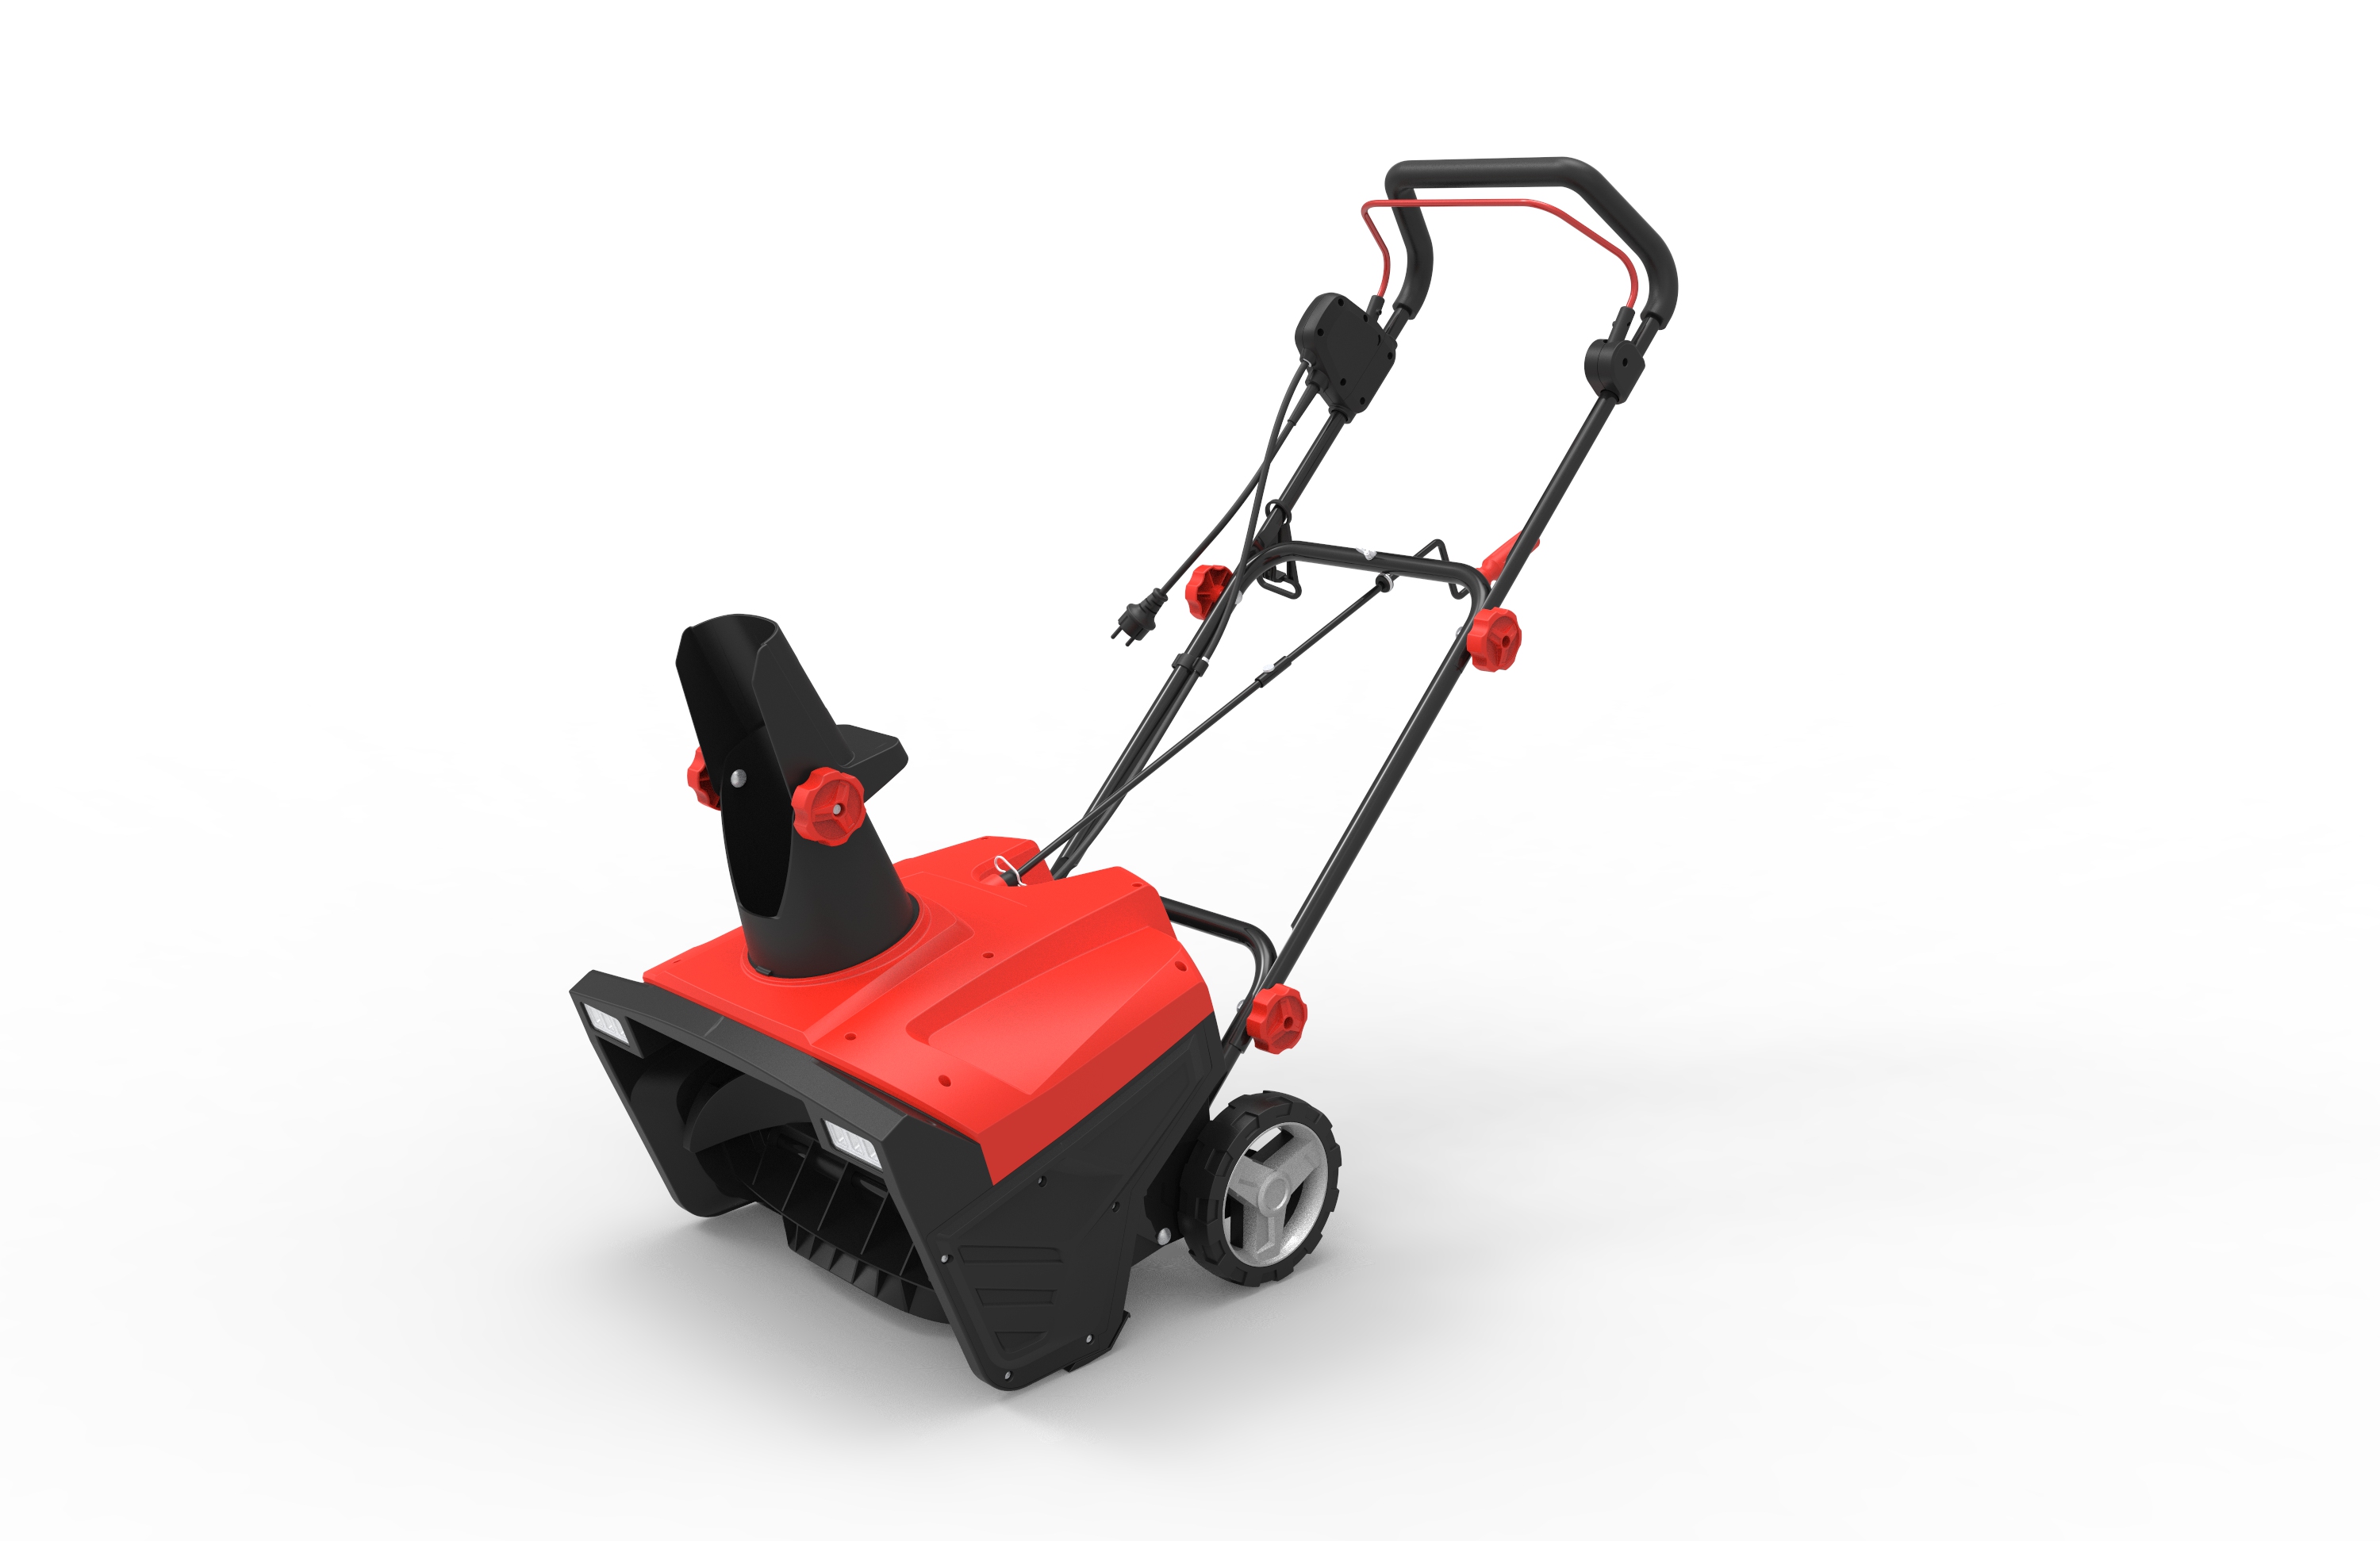 AC Electric Snow Thrower / Blower